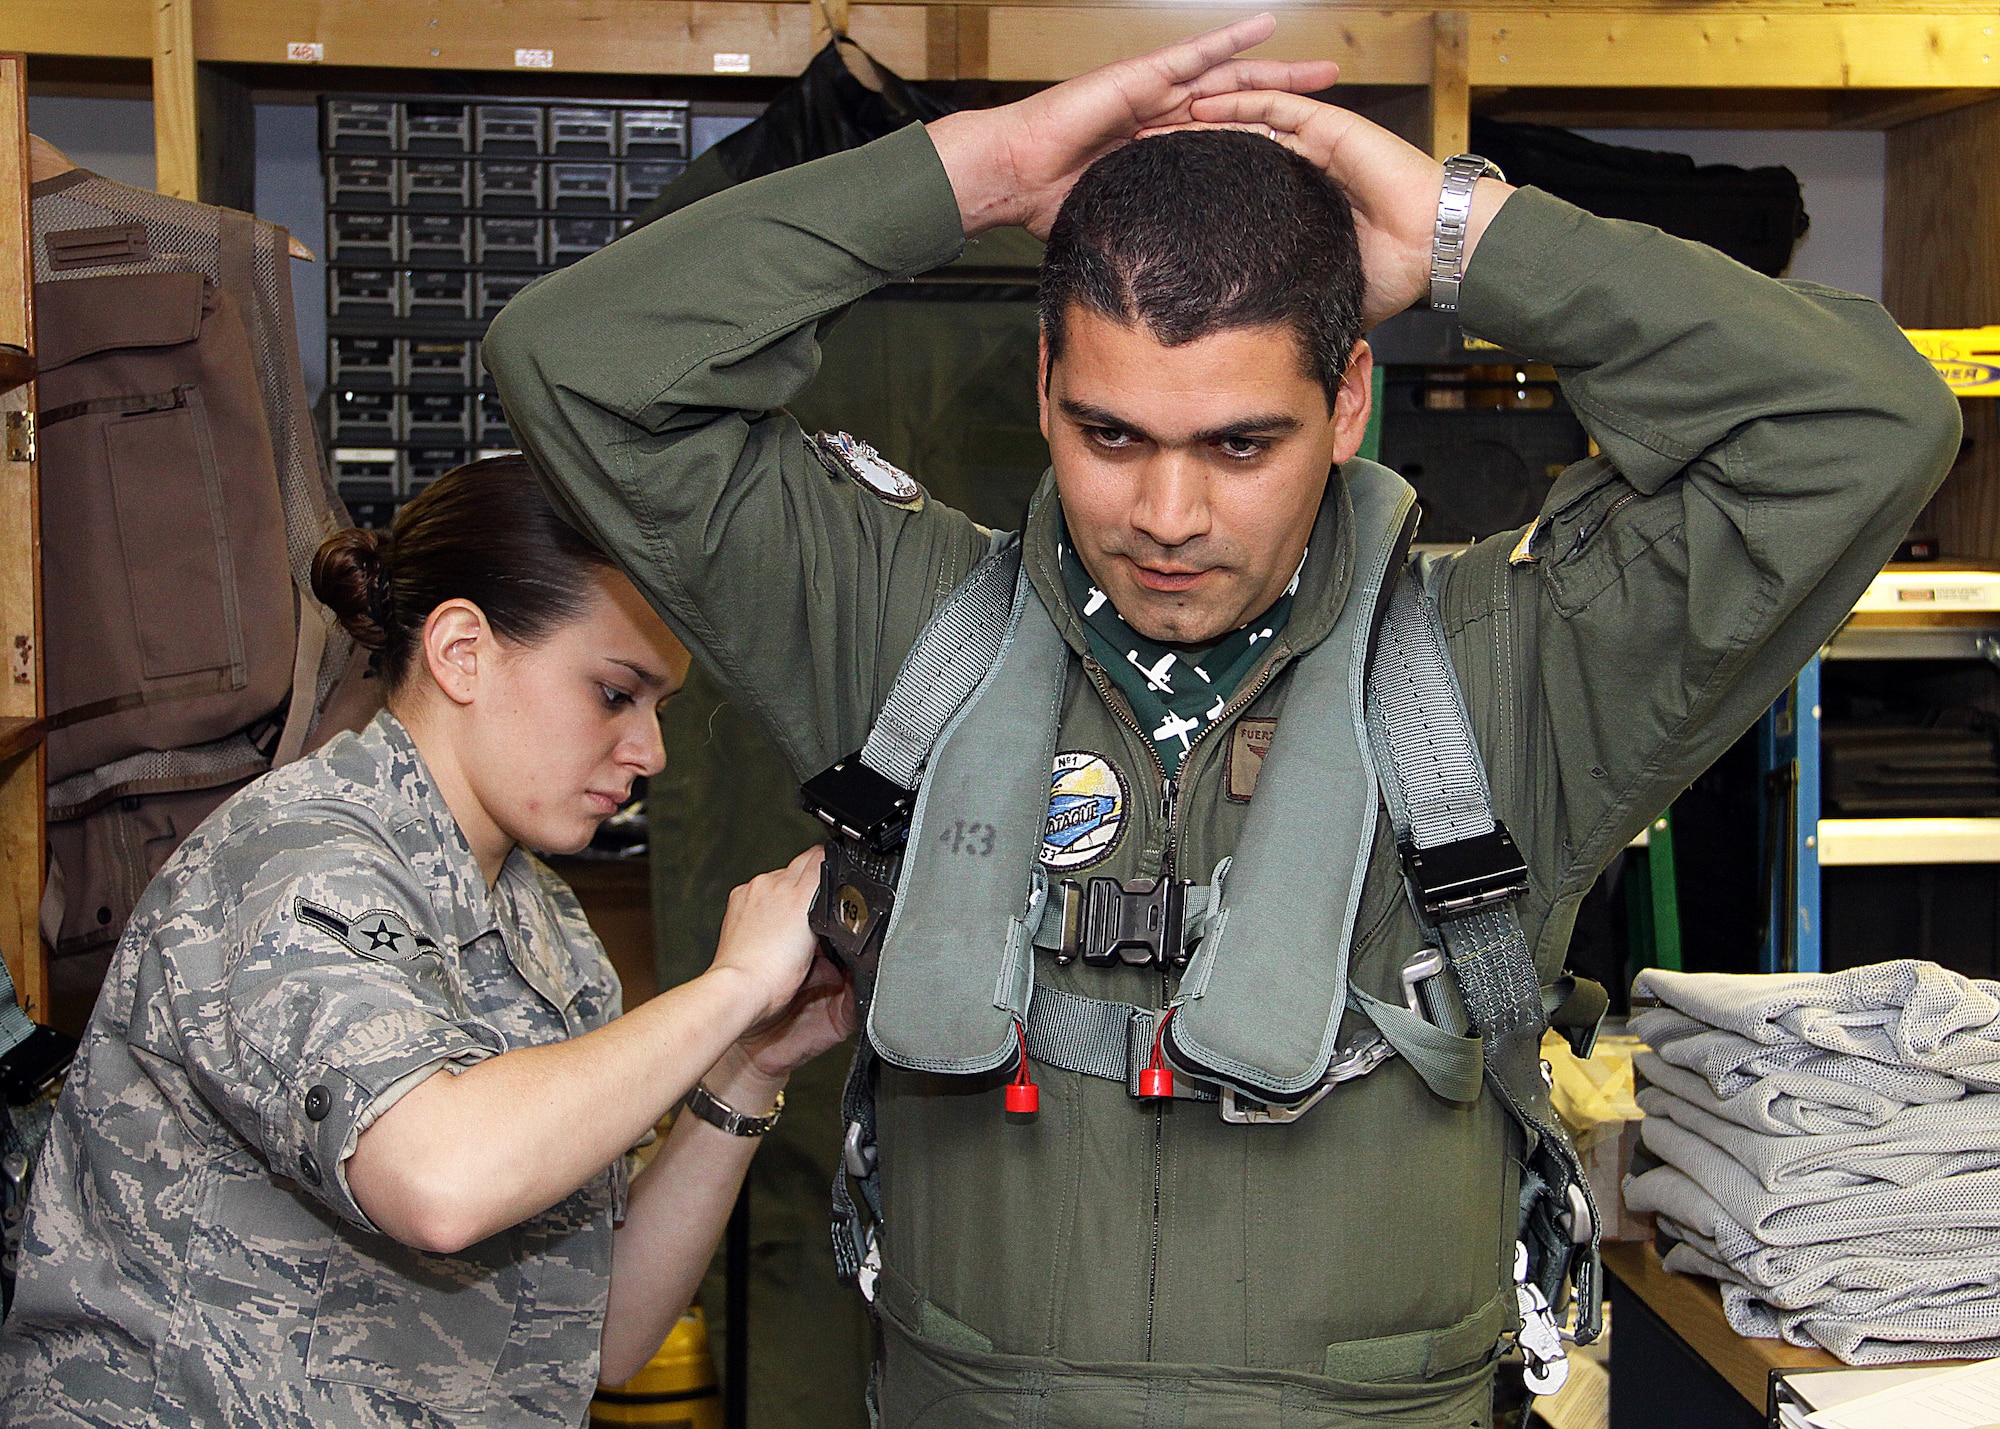 Airman Nina Thompson, 482nd Operations Support Squadron Aircrew Flight Equipment Specialist, helps Uruguayan Air Force Capt. Patrick Jaimez into a G-suit to prepare for a subject matter expert exchange flight at Homestead Air Reserve Base, Fla., on July 26. Capt. Jaimez was one of five pilots from the 2nd Air Brigade, Durzano, Uruguay who visited Homestead for a 3-day series of briefings, training and F-16 flights. (U.S. Air Force photo/Ian Carrier)